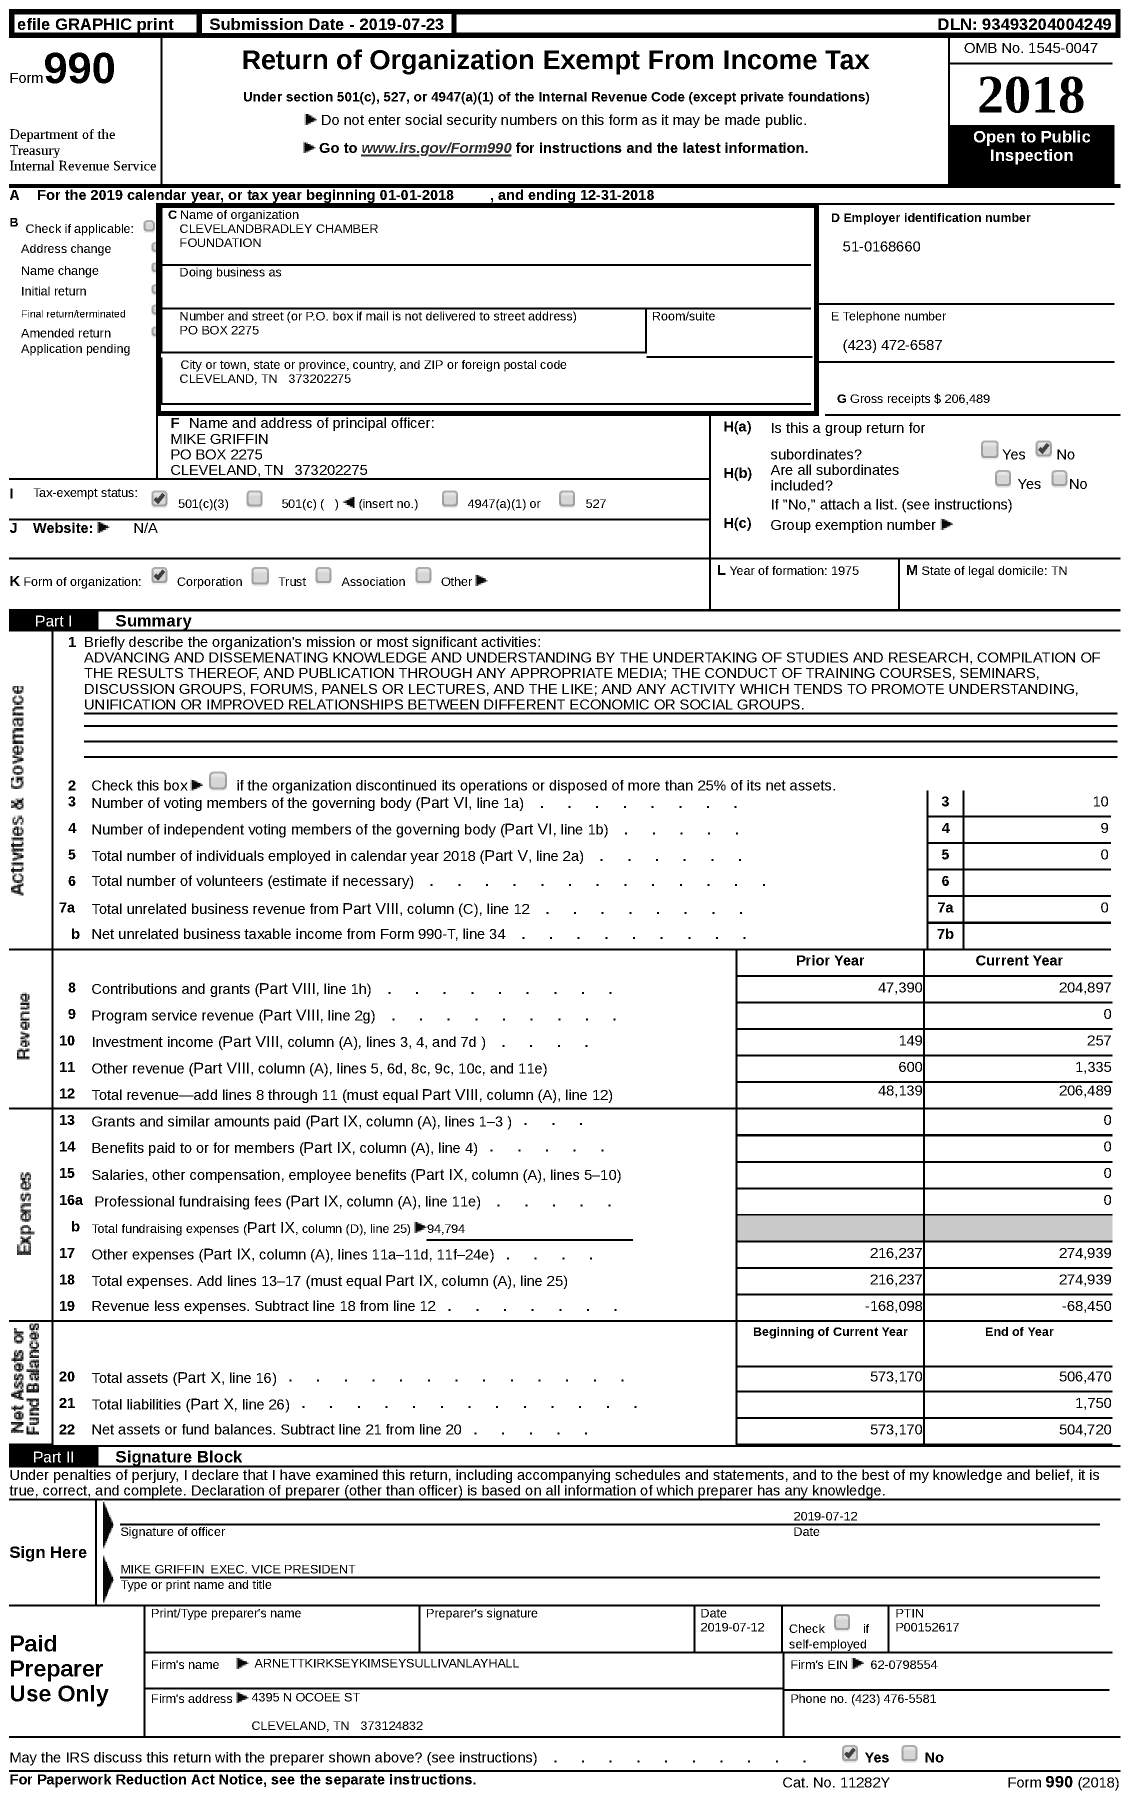 Image of first page of 2018 Form 990 for Clevelandbradley Chamber Foundation